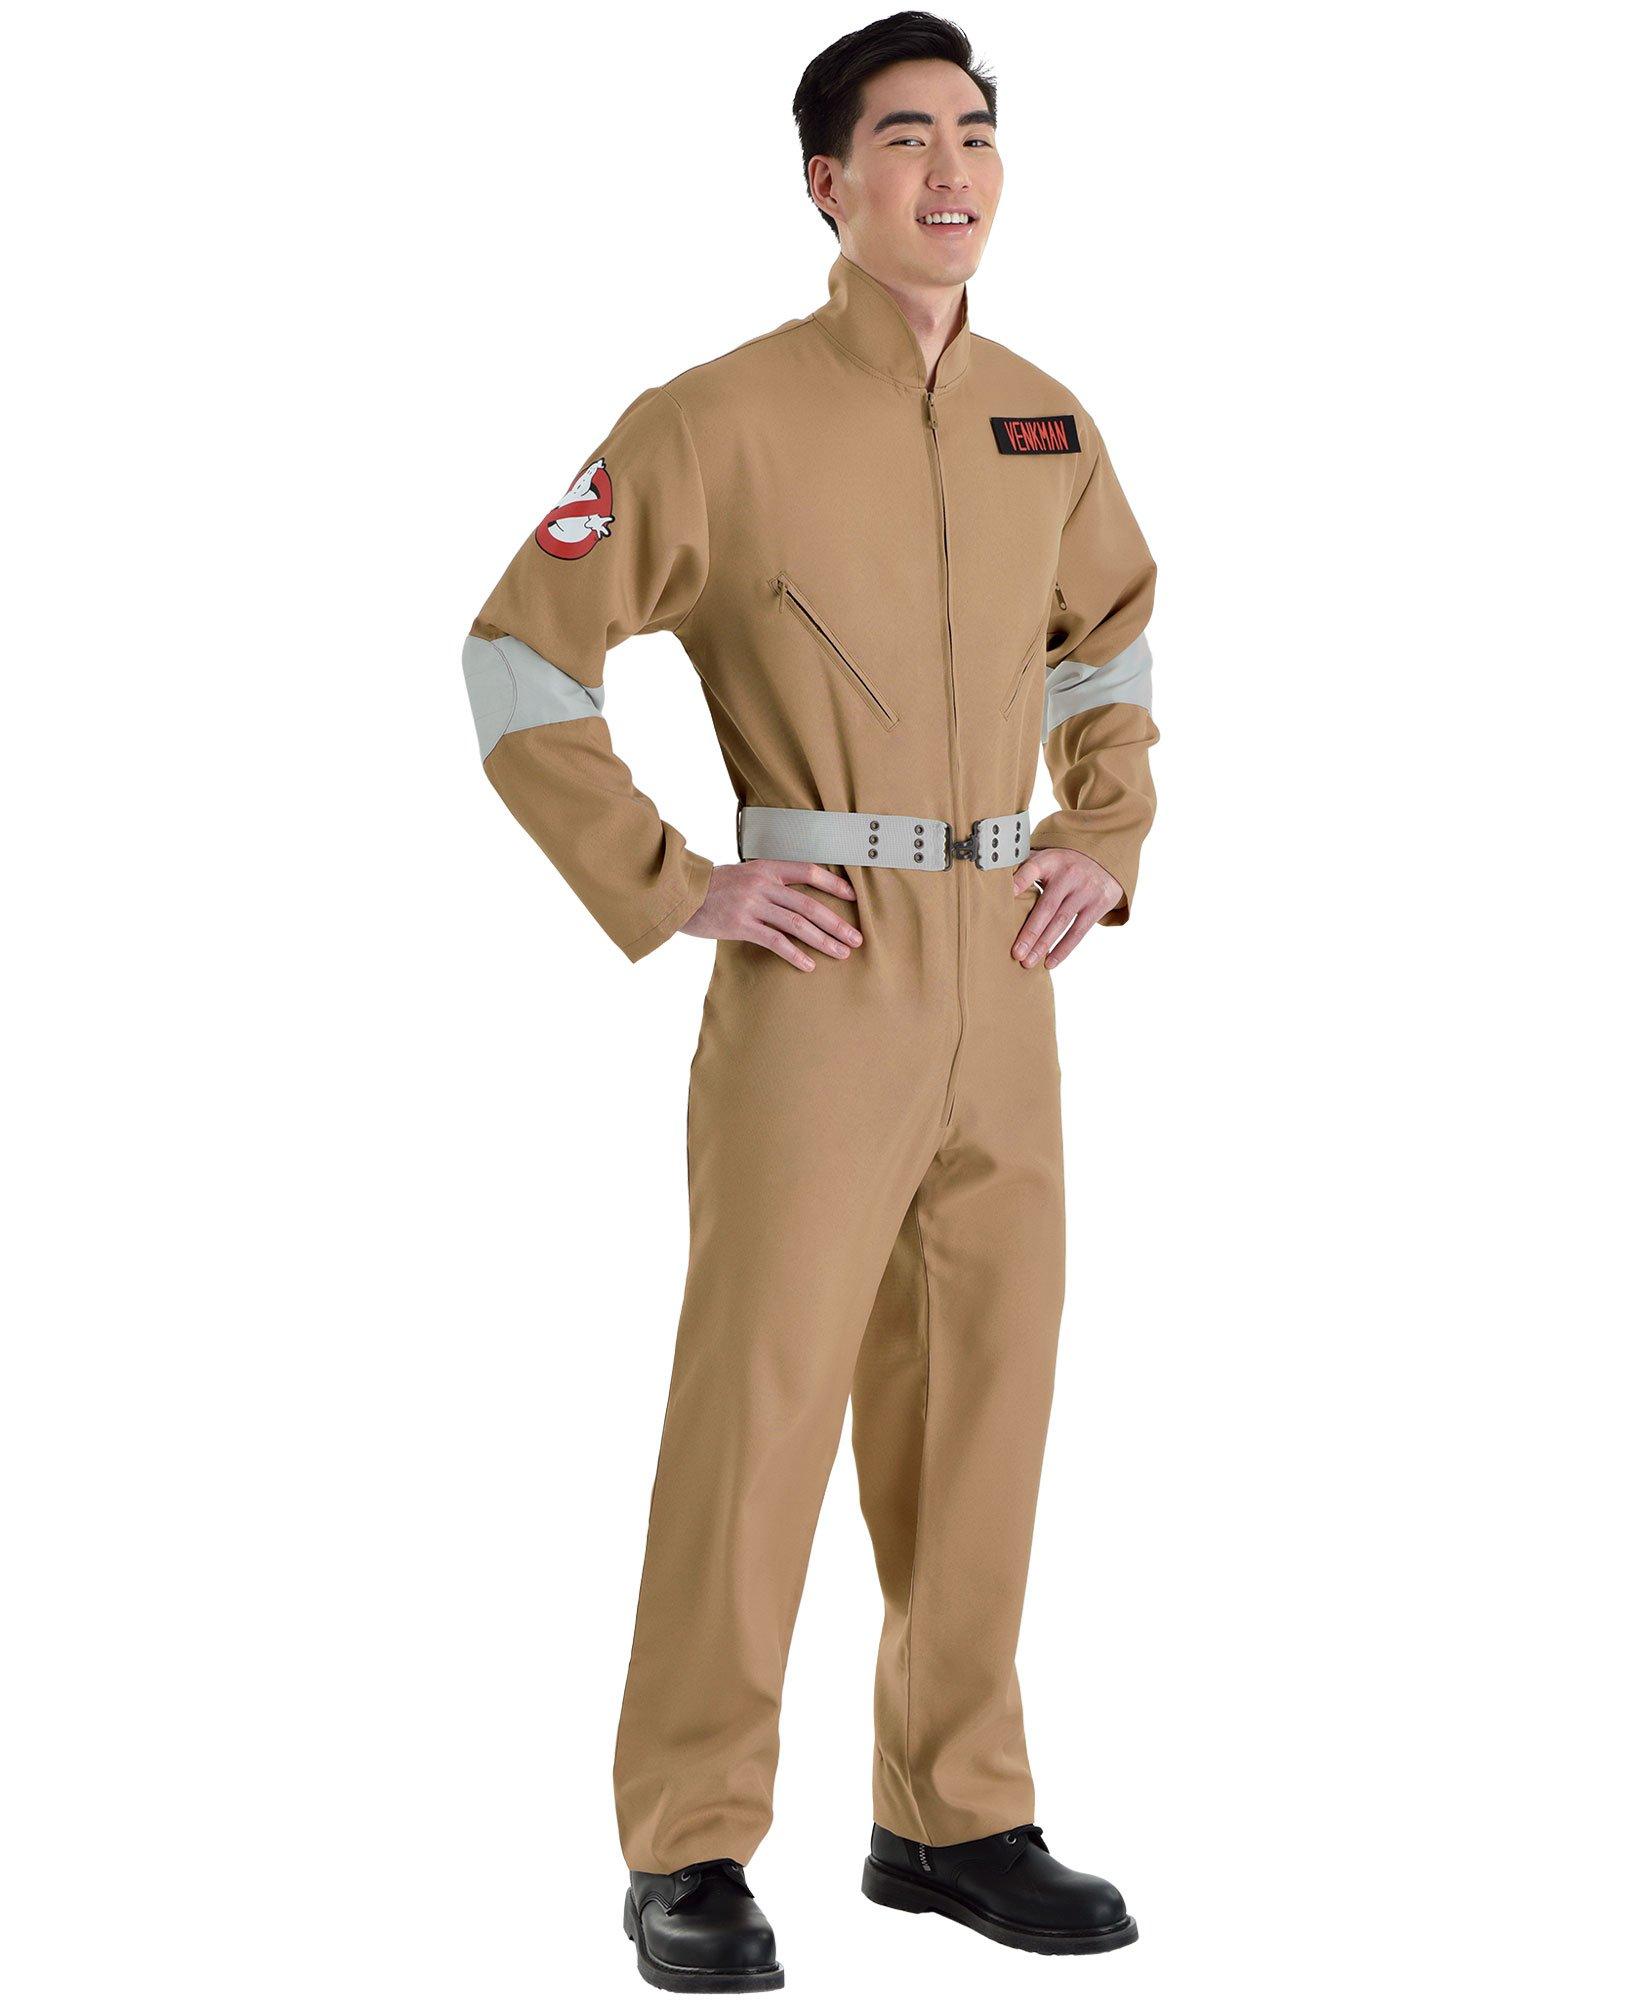 Party City Ghostbusters Halloween Costume for Babies, Includes Printed  Jumper with Leg Snaps